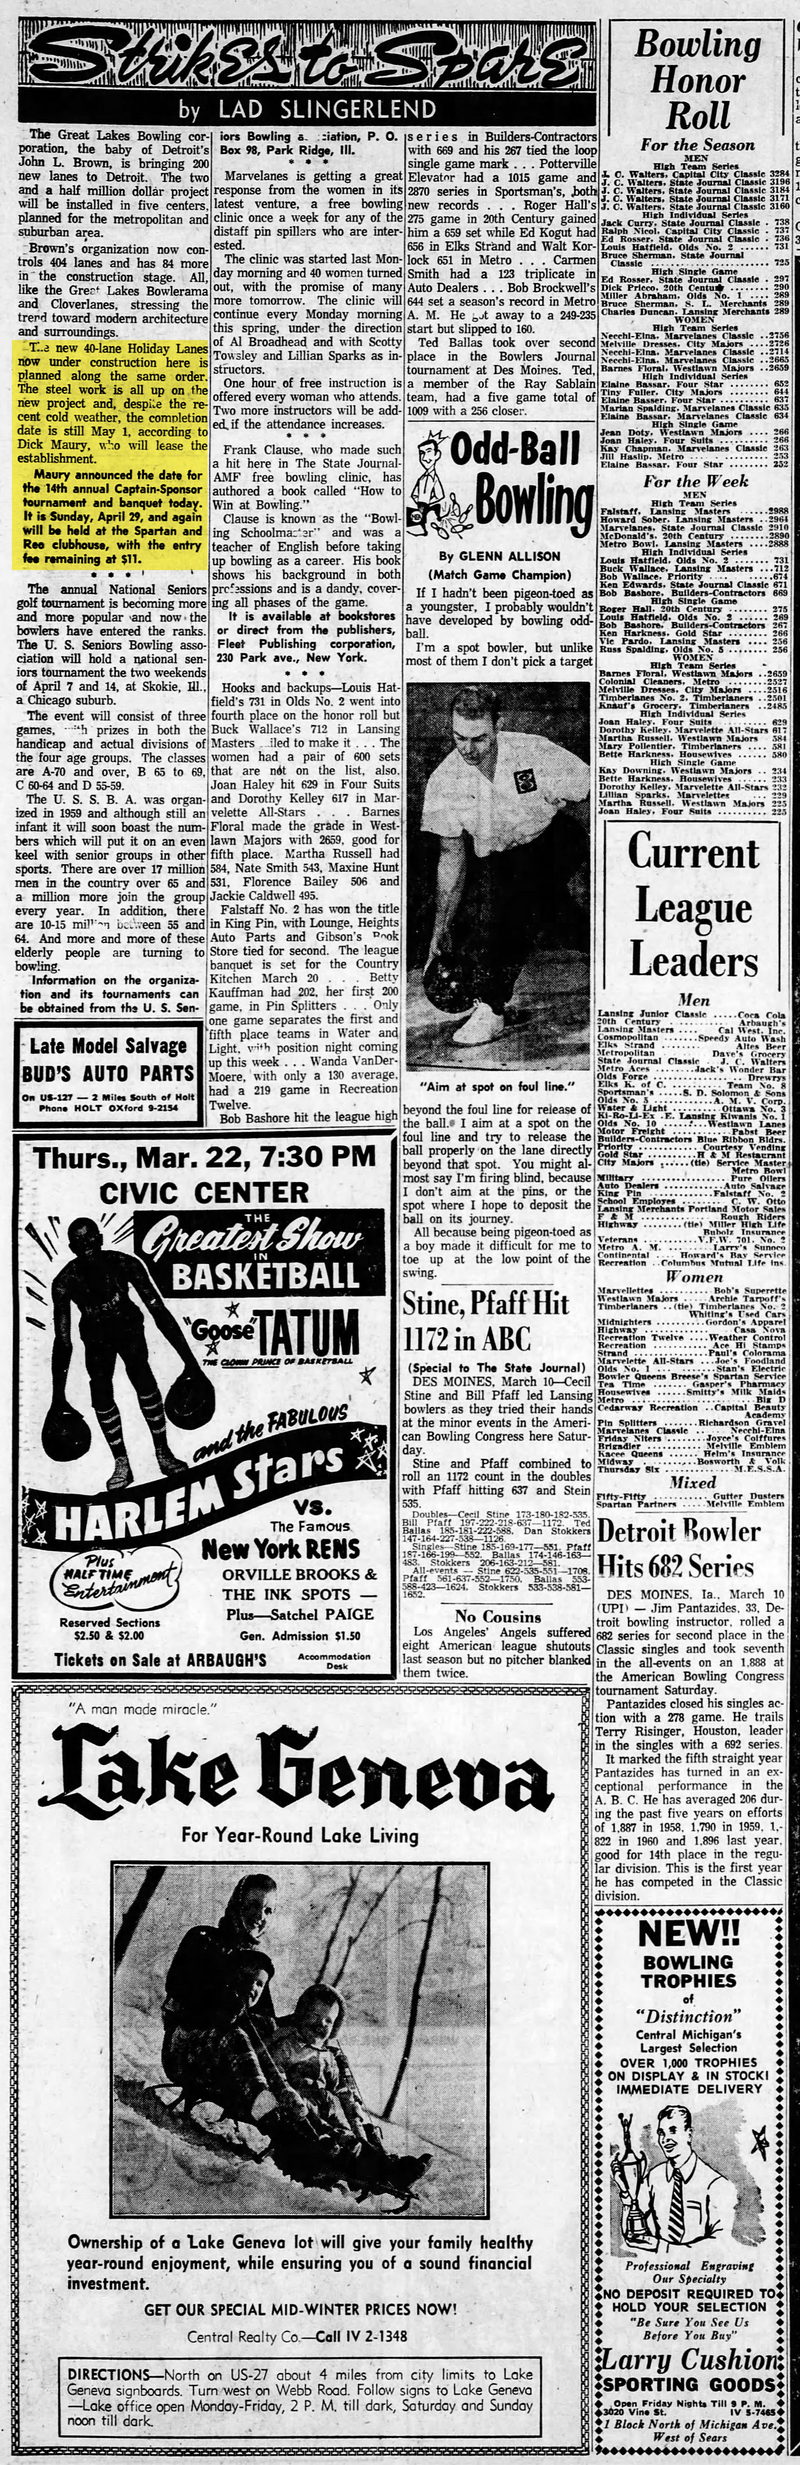 Spare Time Entertainment Center (Holiday Lanes) - Sun Mar 11 1962 Article